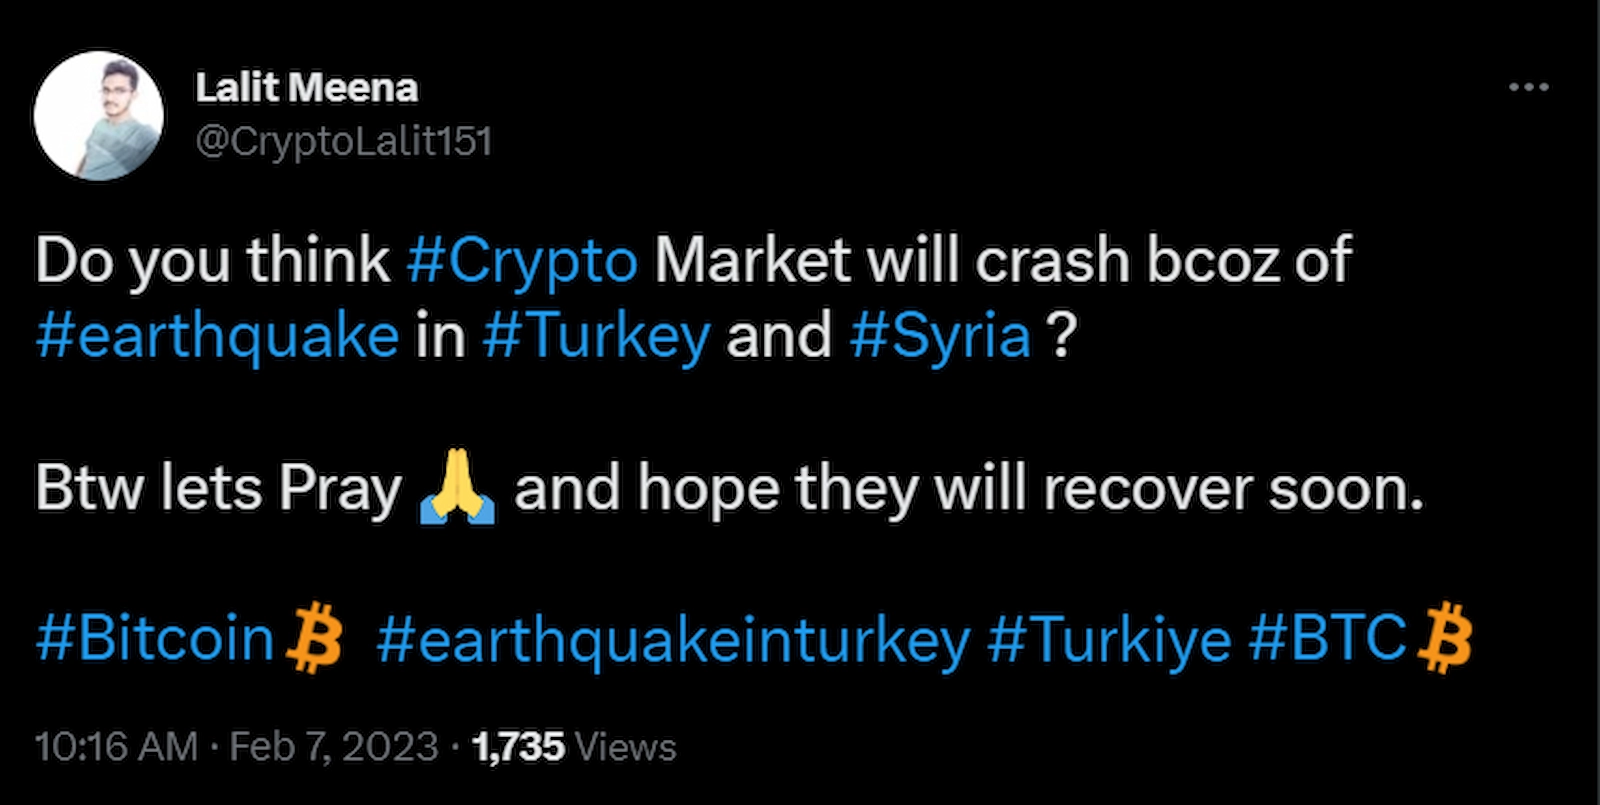 Indian crypto Twitter influencer seemed more worried about the crypto market than the victims of earthquake in Turkey and Syria.